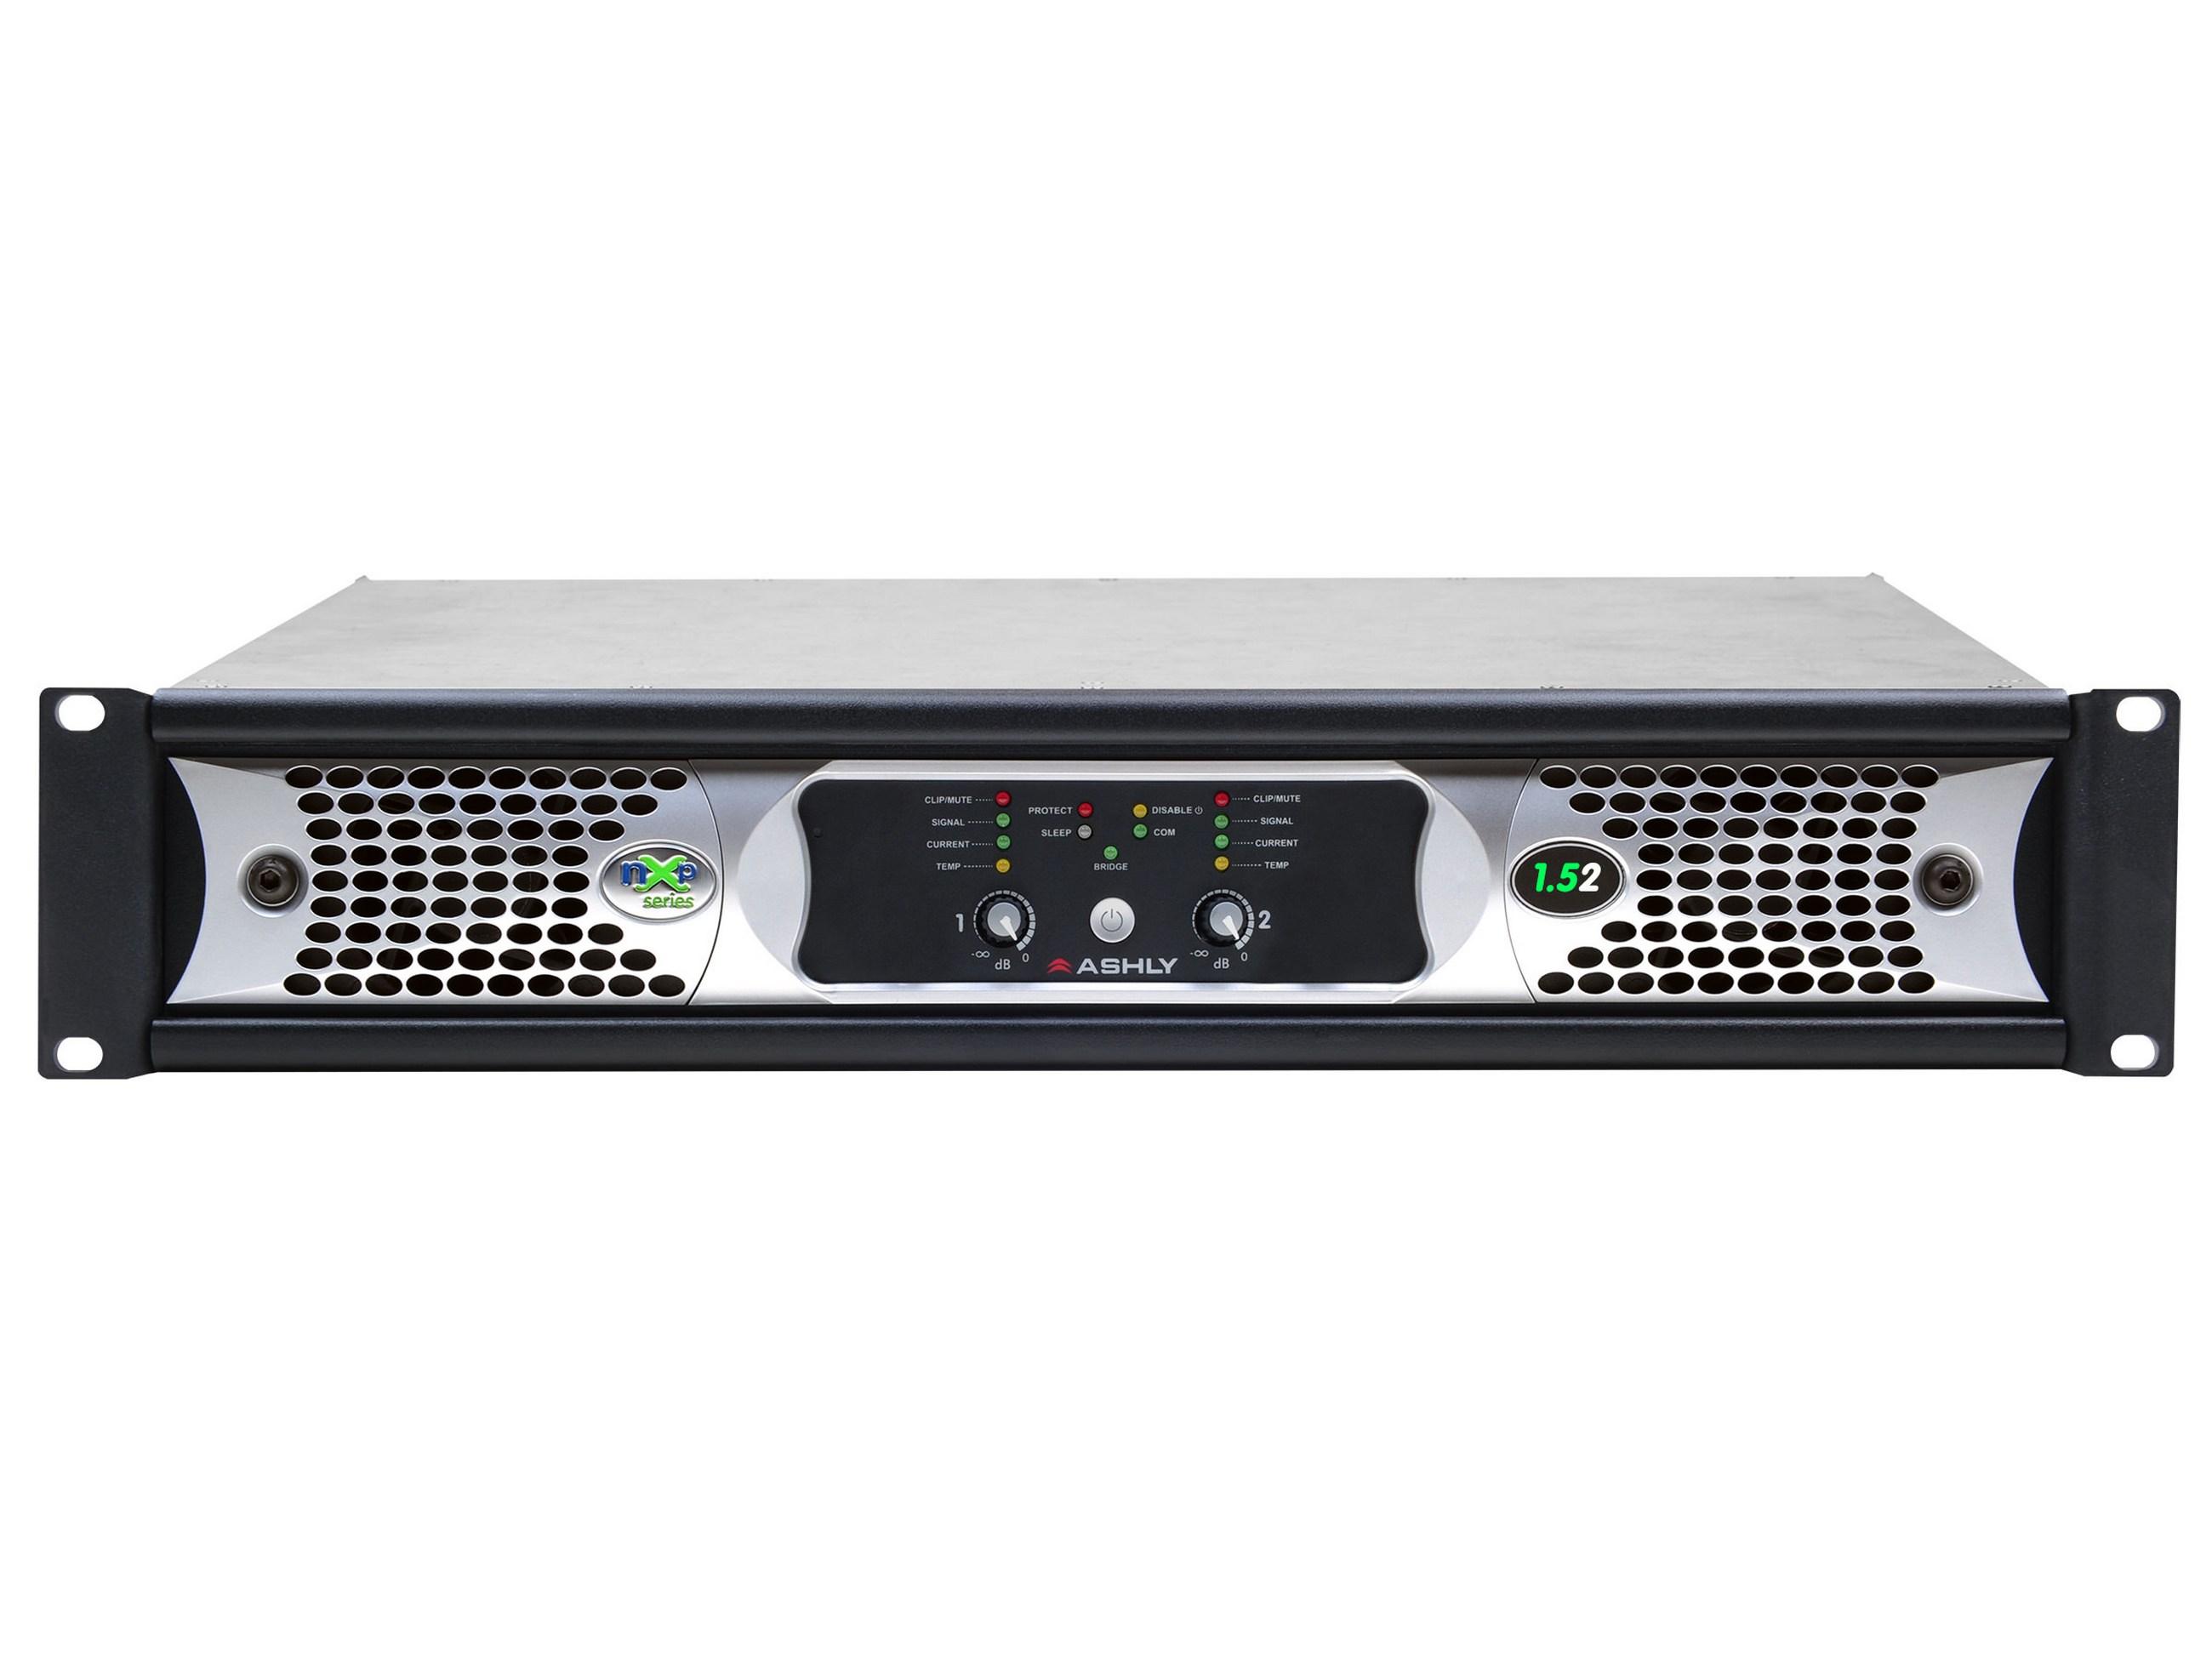 nXp1.52 Network Power Amplifier 2 x 1500 Watts/2 Ohms with Protea DSP by Ashly